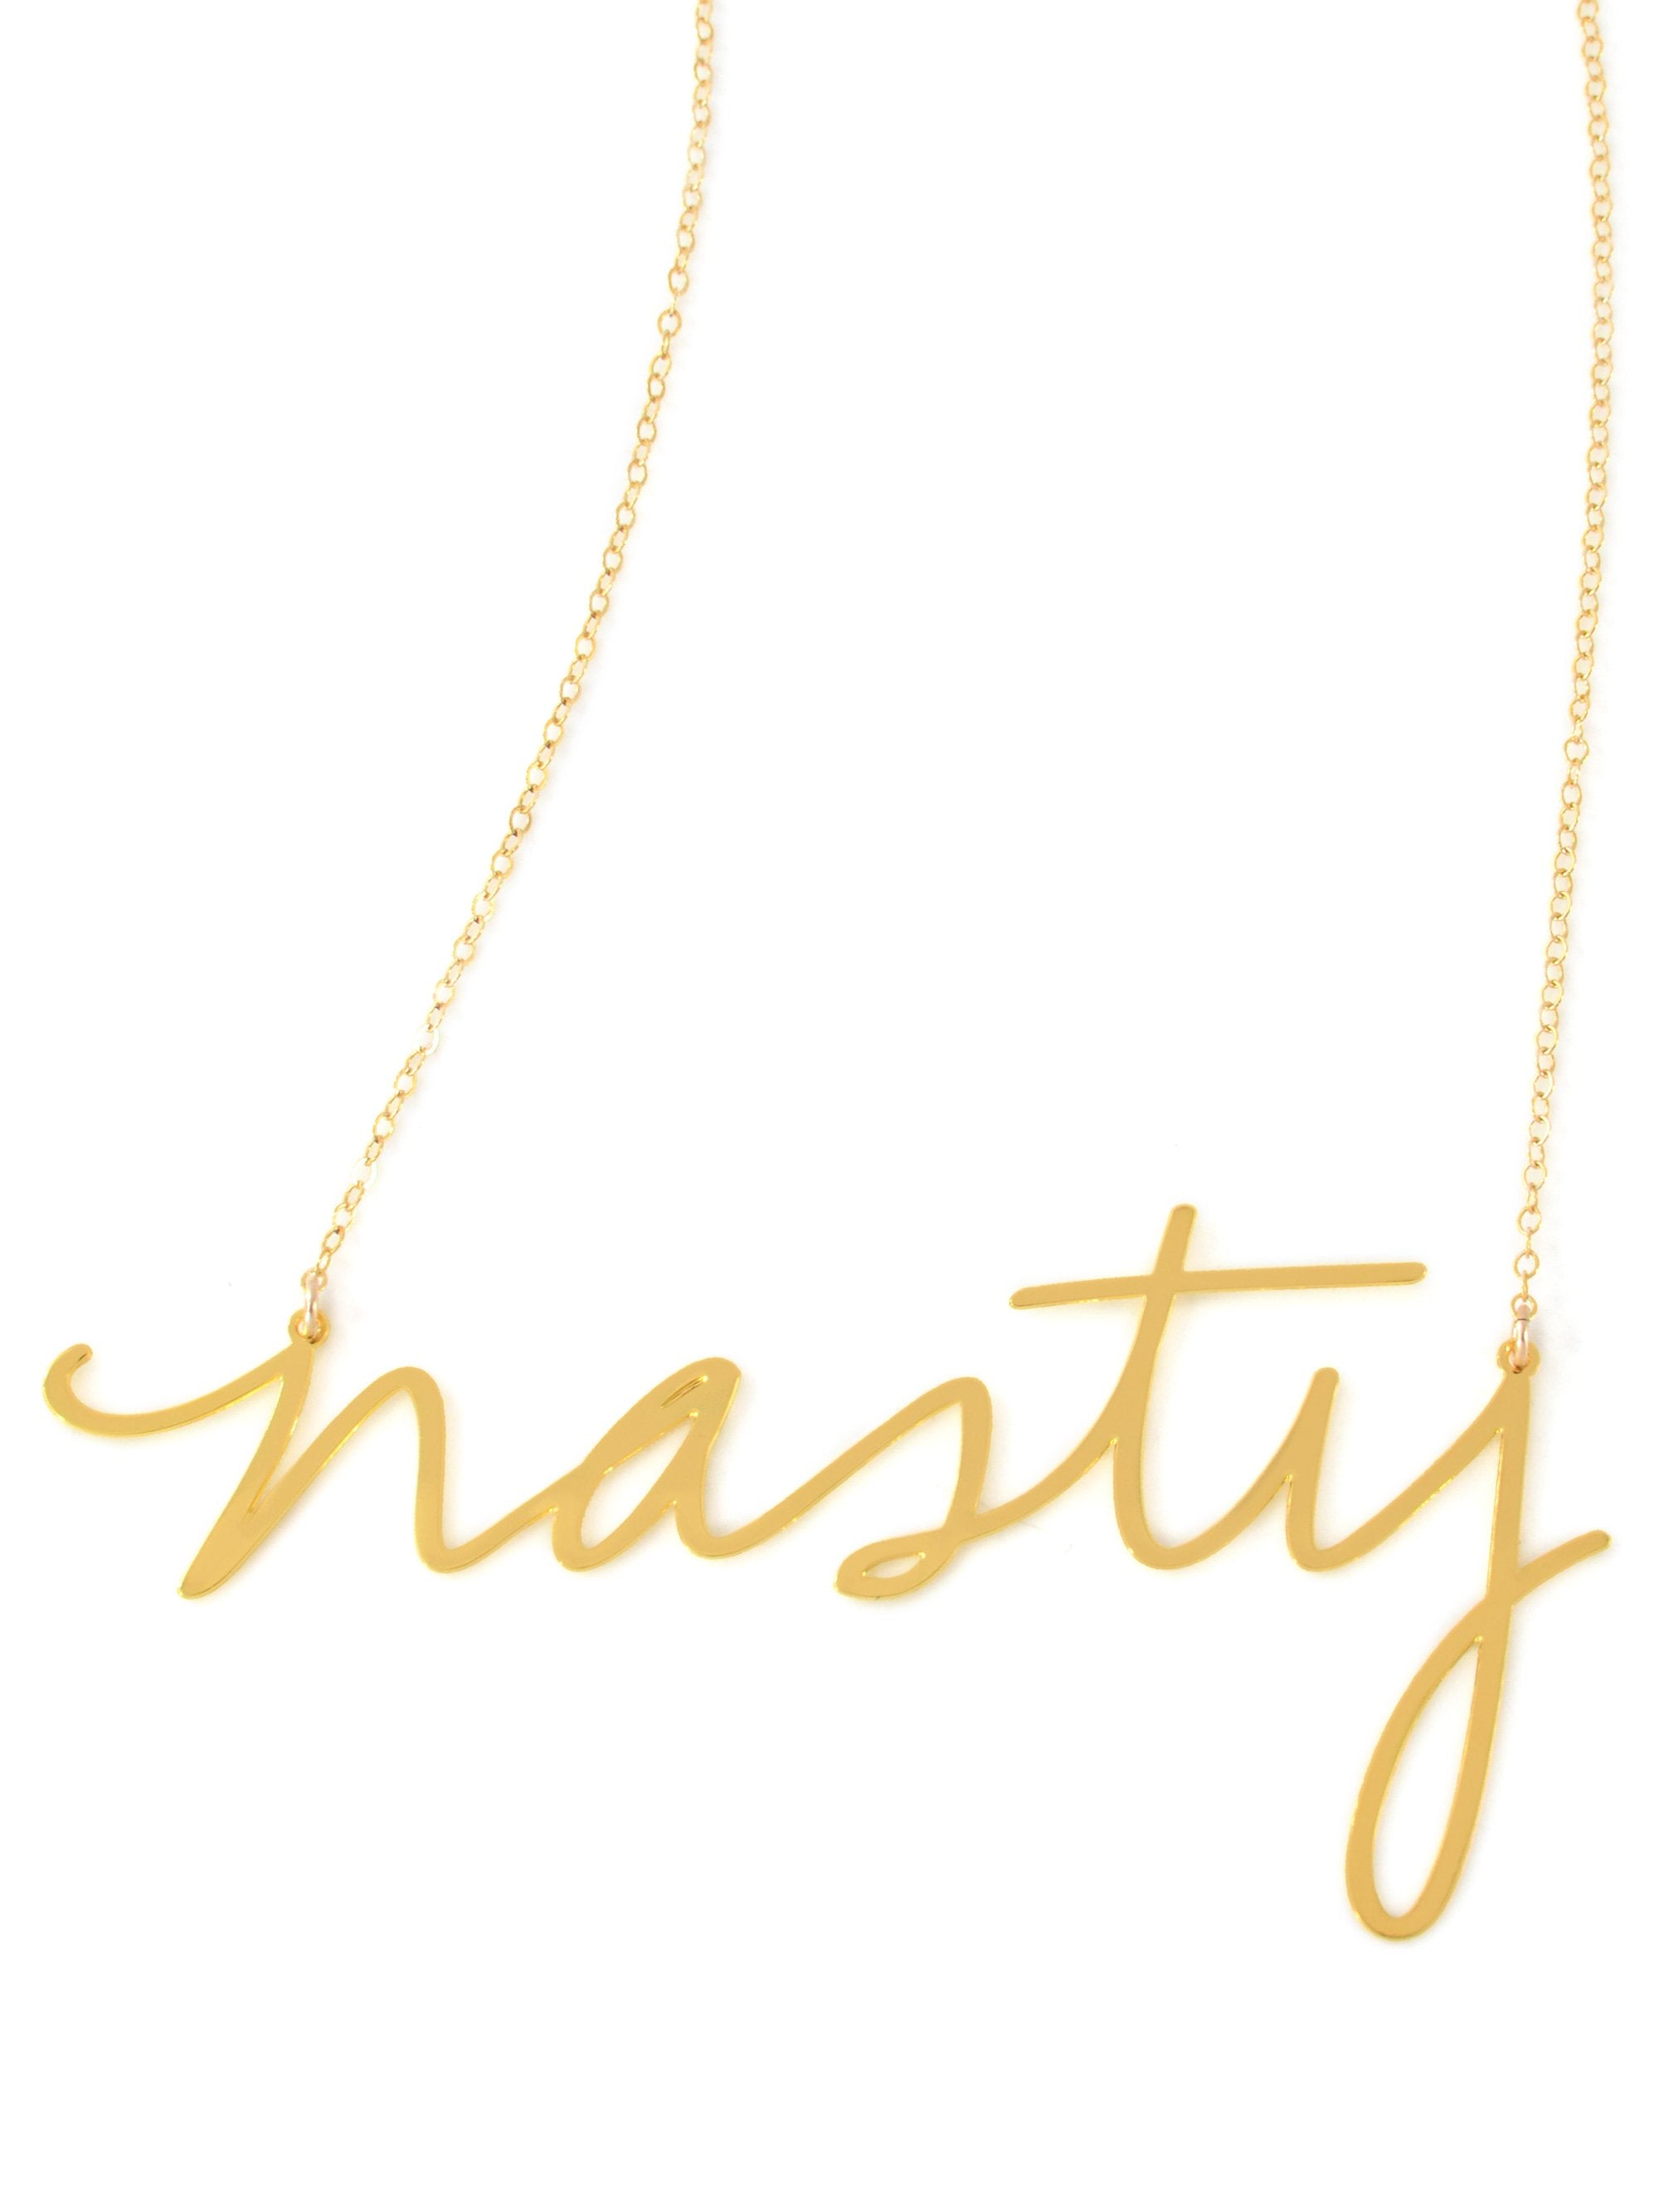 Nasty Necklace - High Quality, Affordable, Hand Written, Empowering, Self Love, Mantra Word Necklace - Available in Gold and Silver - Small and Large Sizes - Made in USA - Brevity Jewelry